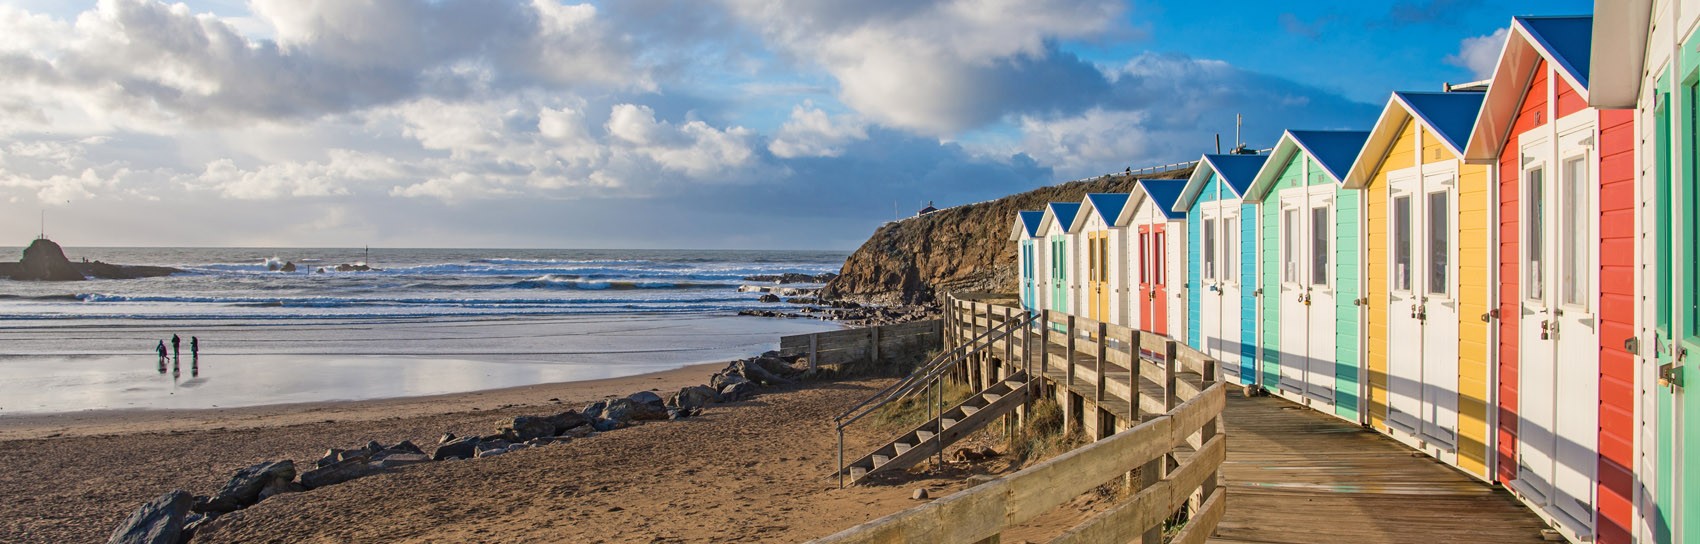 Beach huts at Bude in Cornwall. Photograph by RICHARDST